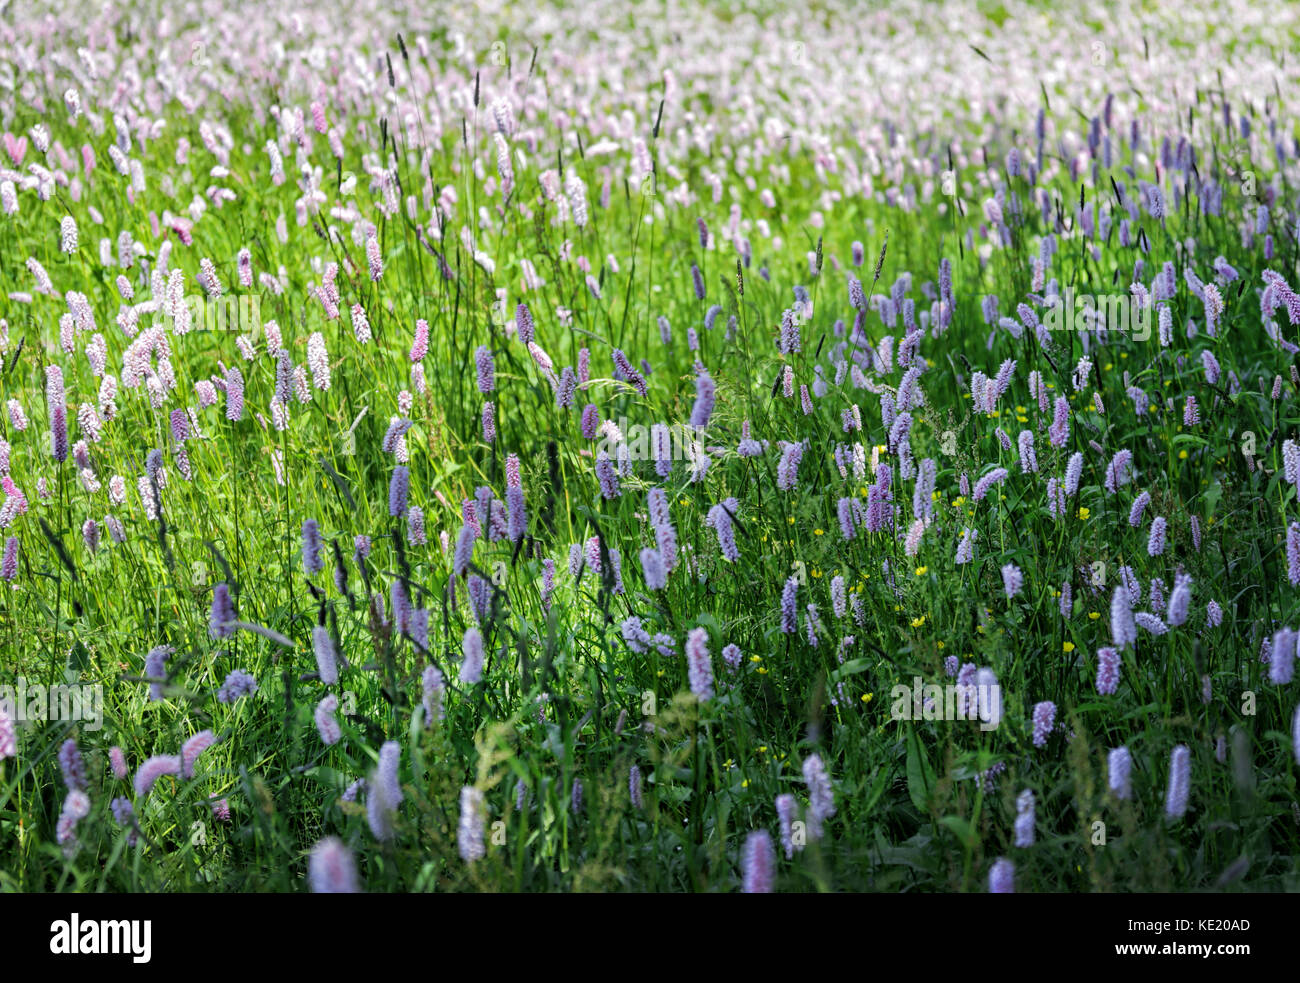 beautiful natural wild flowers blooming in the field close up Stock Photo